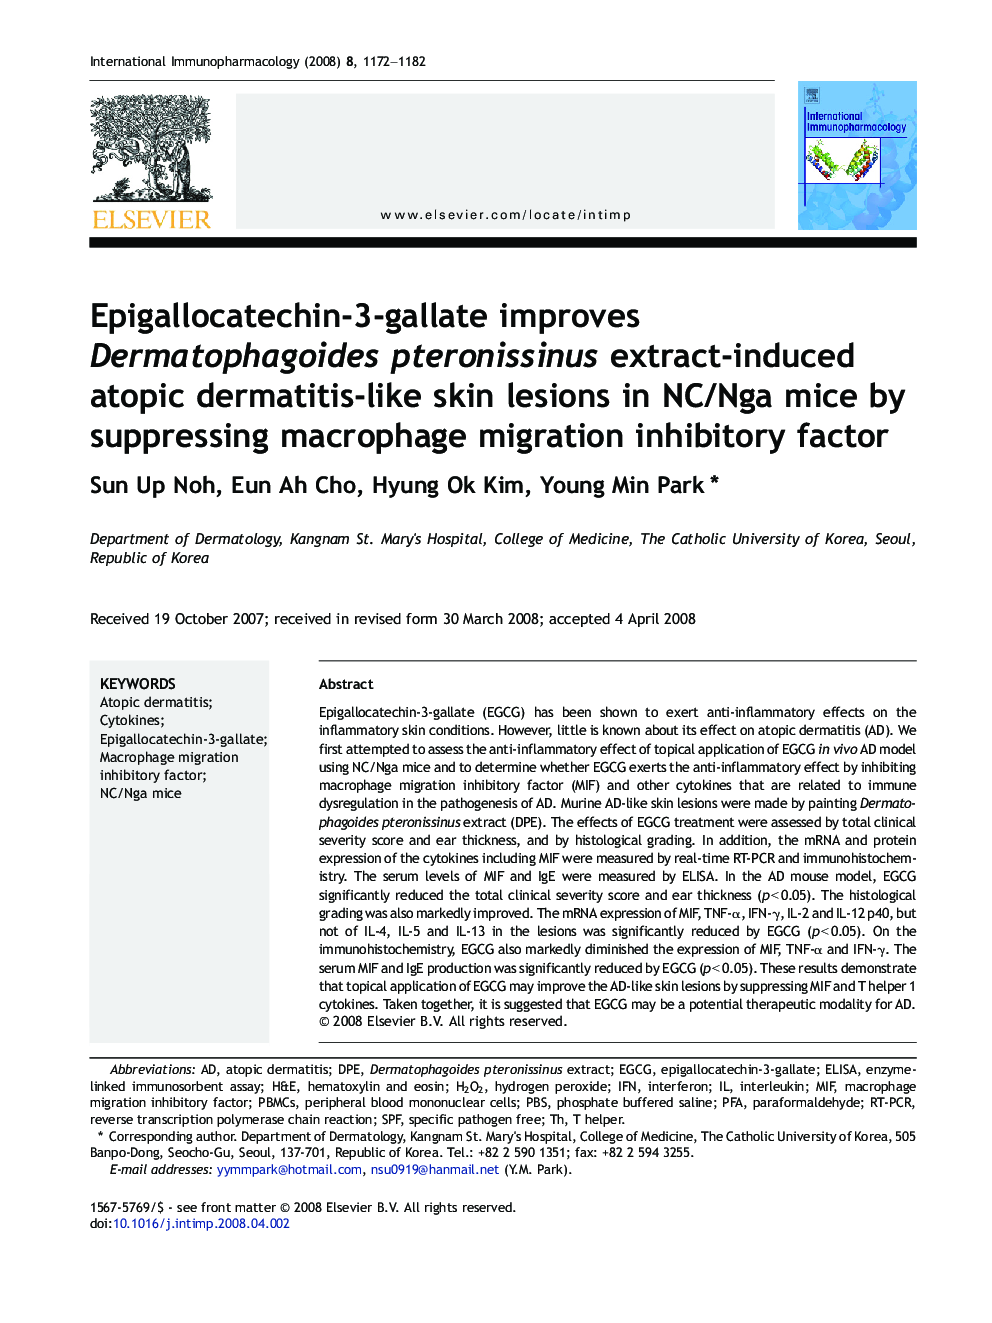 Epigallocatechin-3-gallate improves Dermatophagoides pteronissinus extract-induced atopic dermatitis-like skin lesions in NC/Nga mice by suppressing macrophage migration inhibitory factor